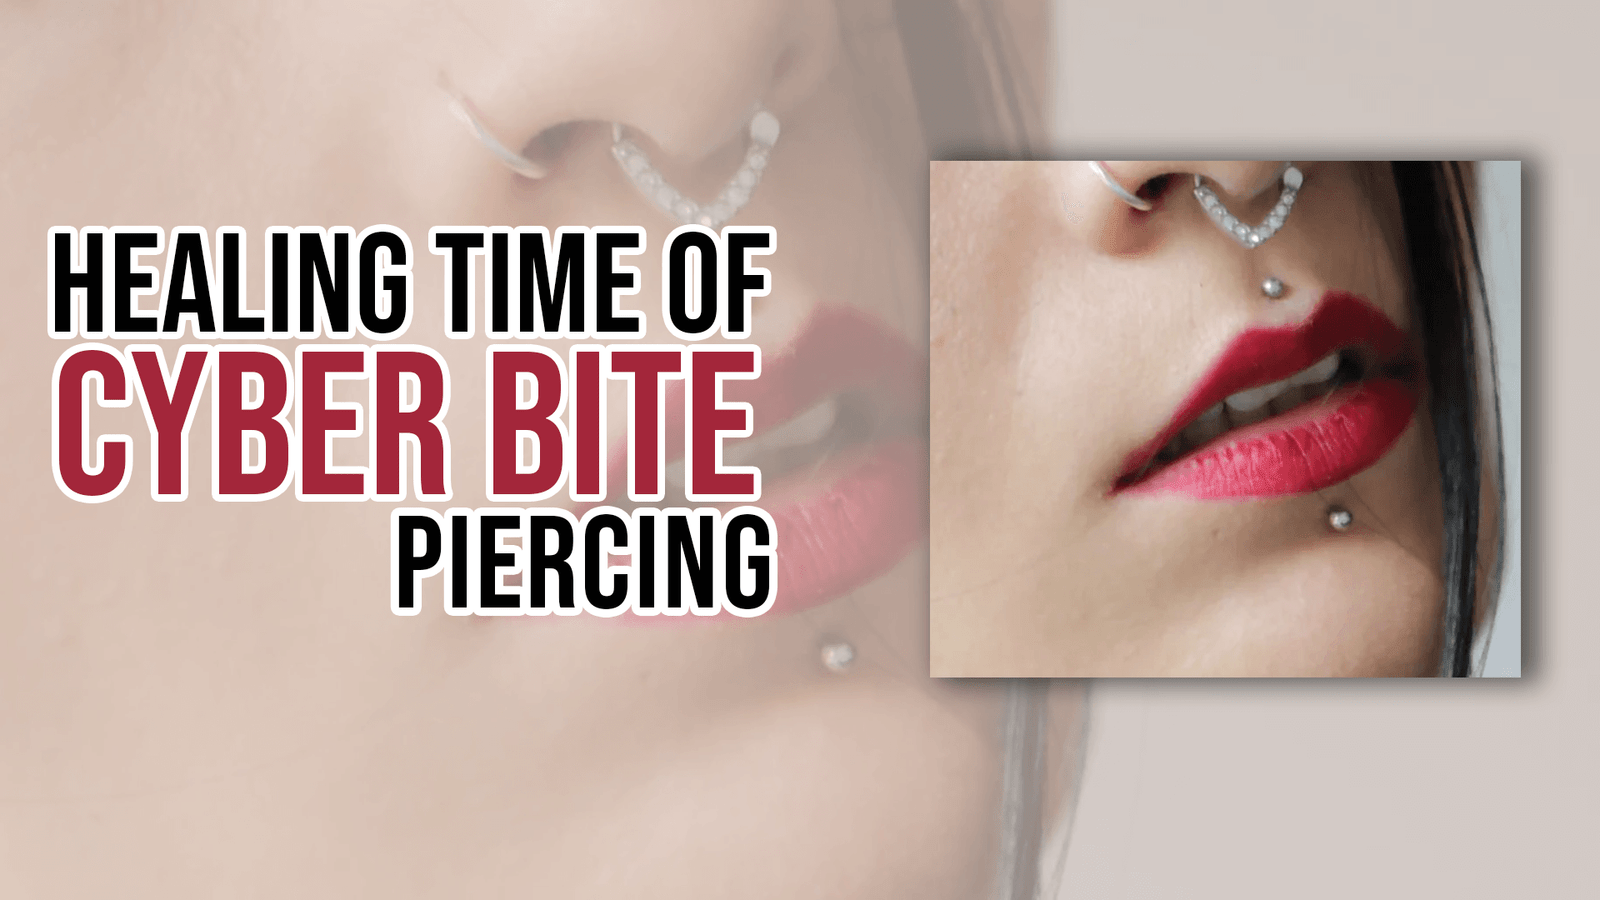 Healing Time of Cyber Bite Piercing